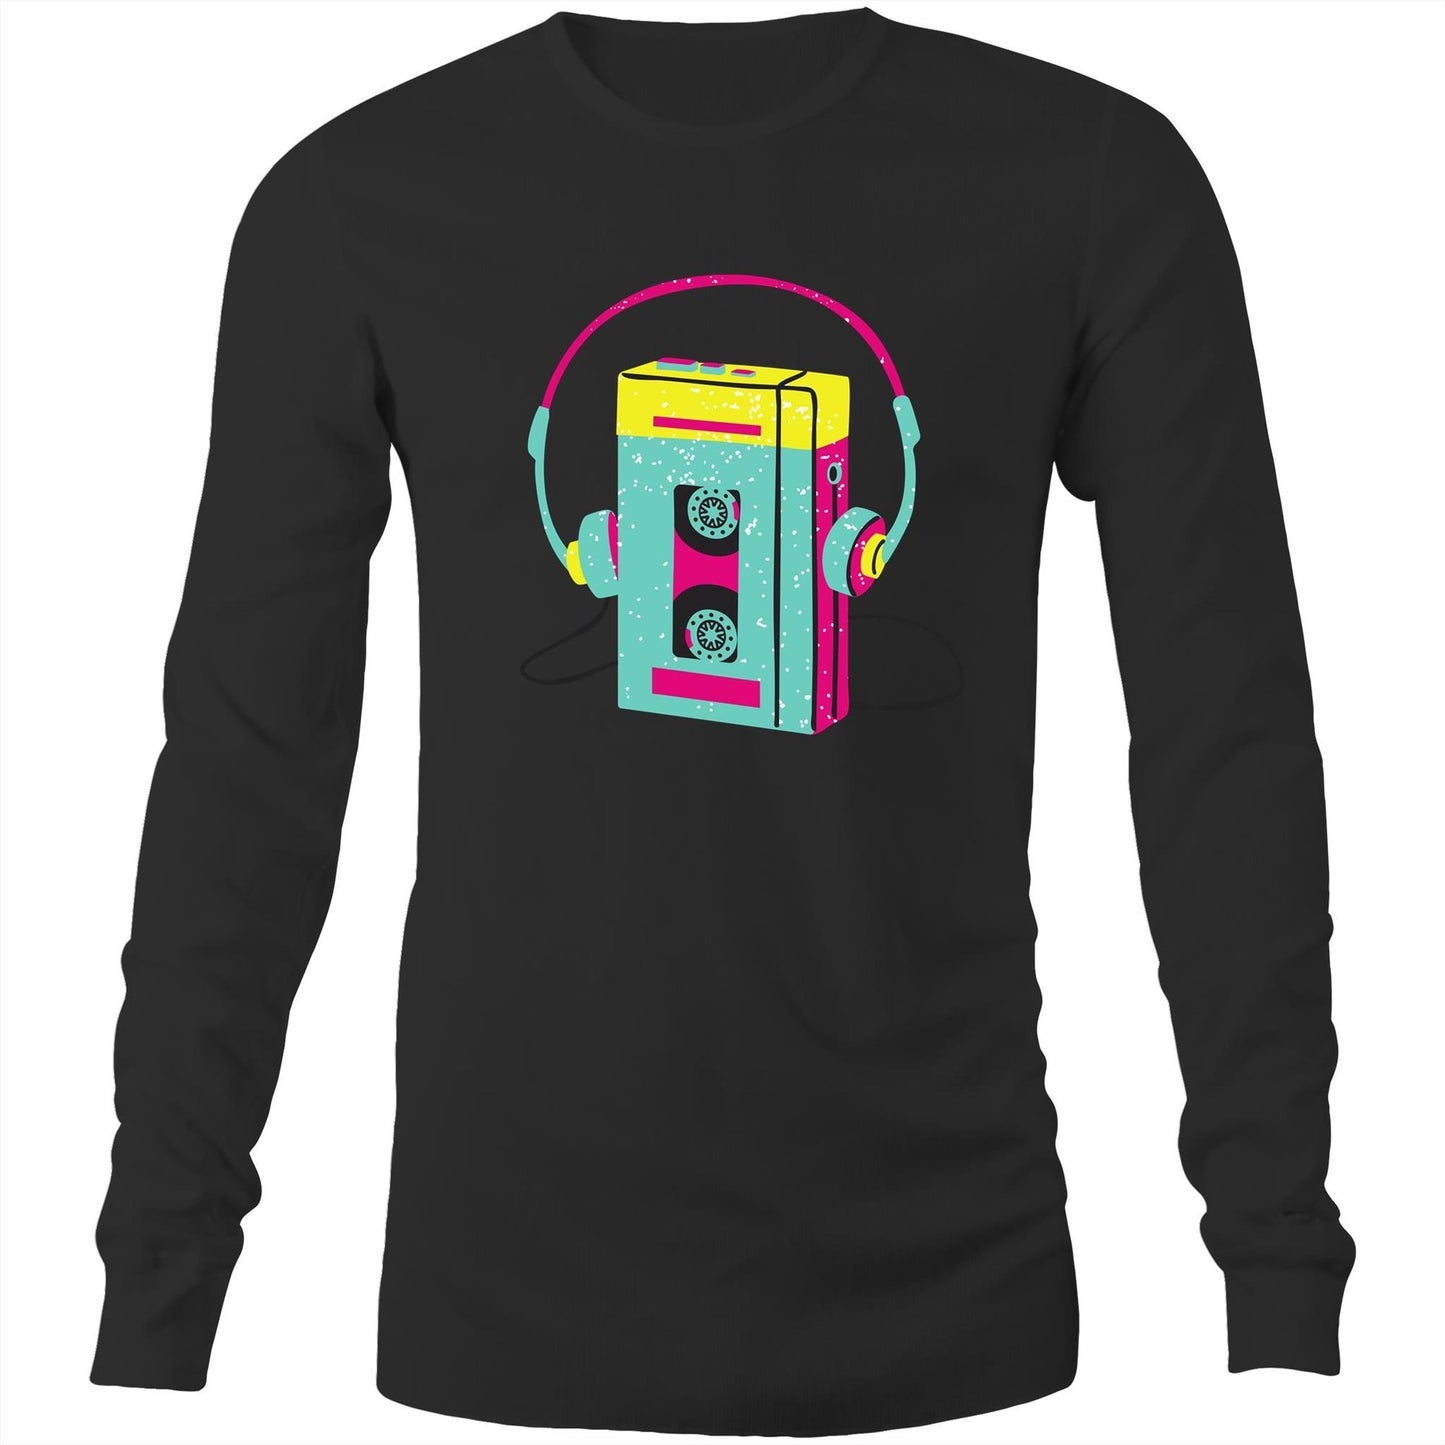 Wired For Sound, Music Player - Long Sleeve T-Shirt Black Unisex Long Sleeve T-shirt Mens Music Retro Womens